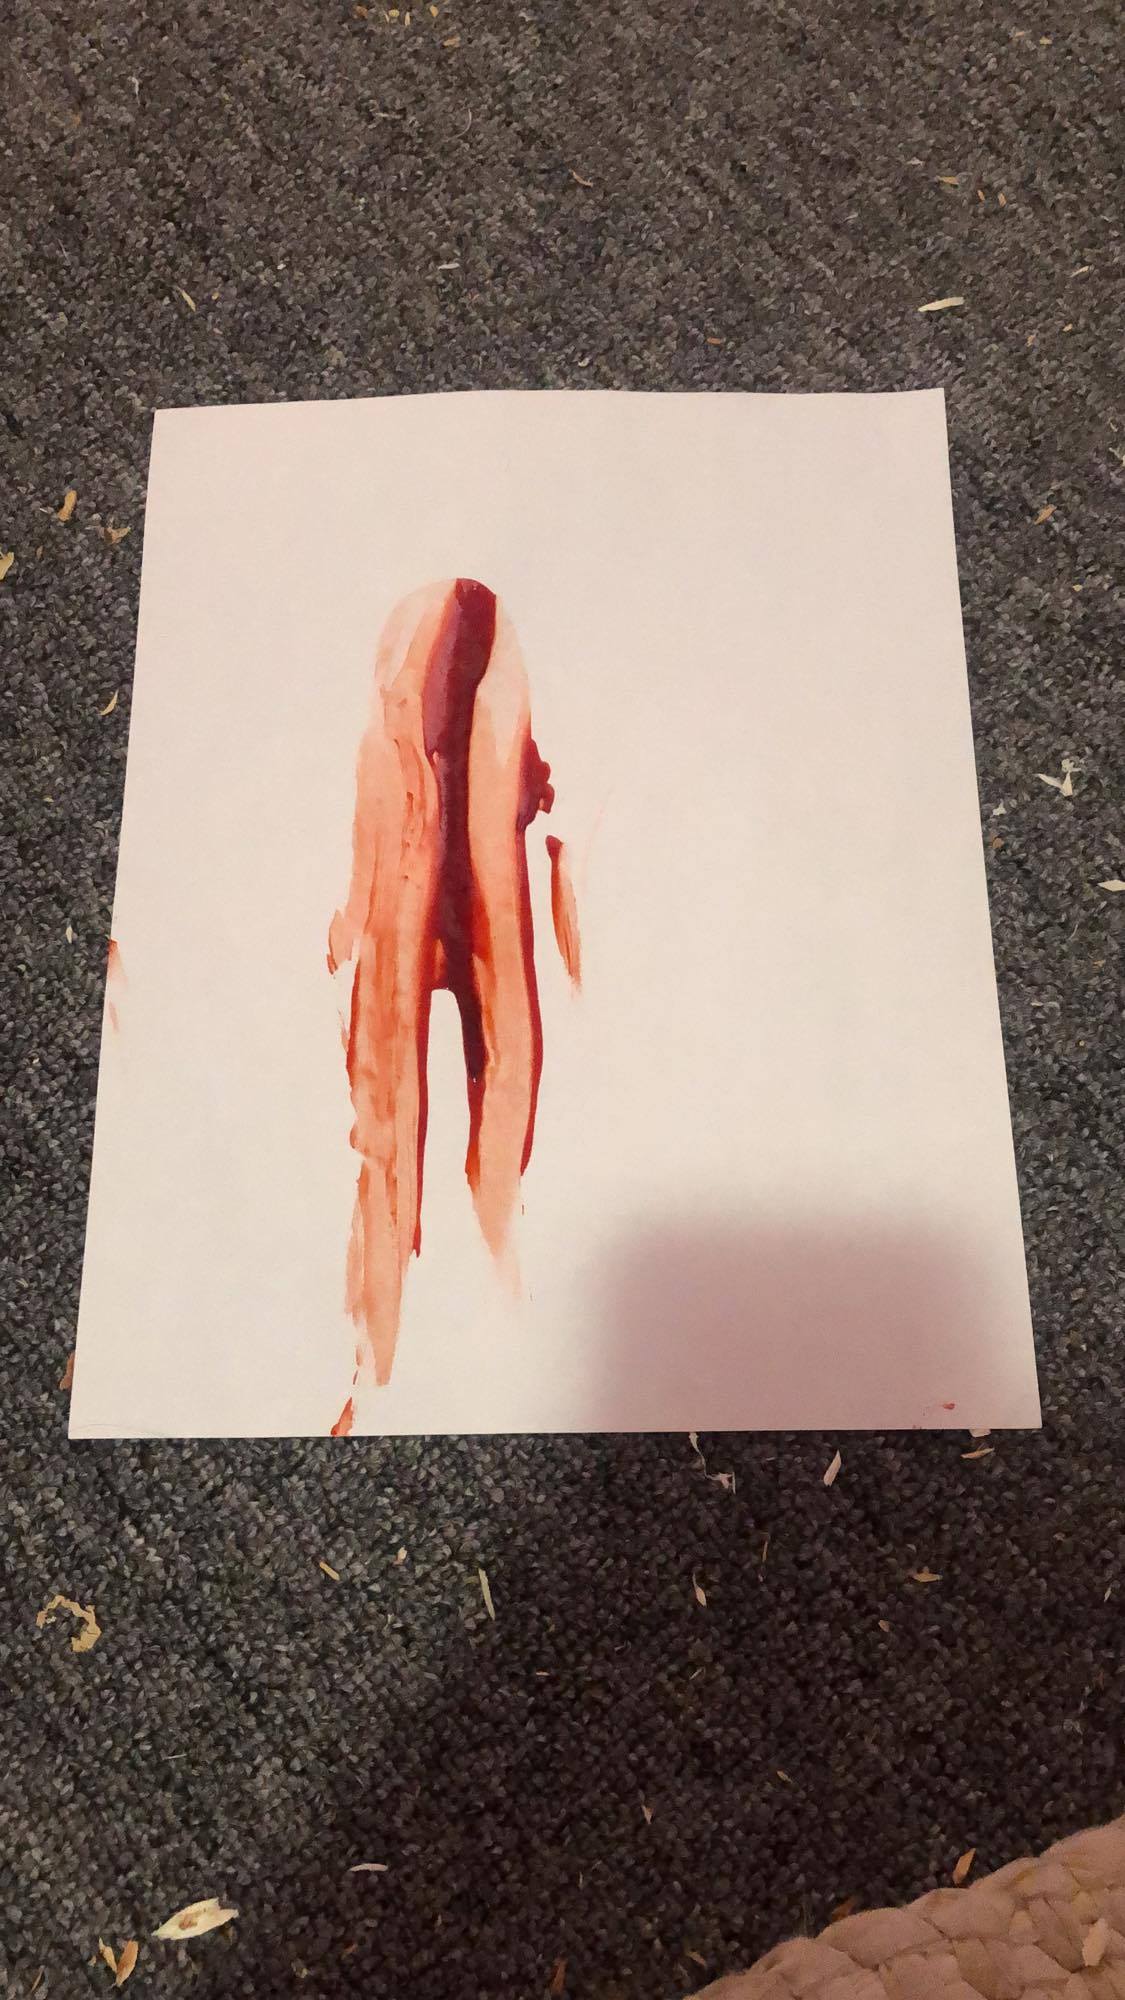 Blood pulled down a canvas to look like a lonely figure.